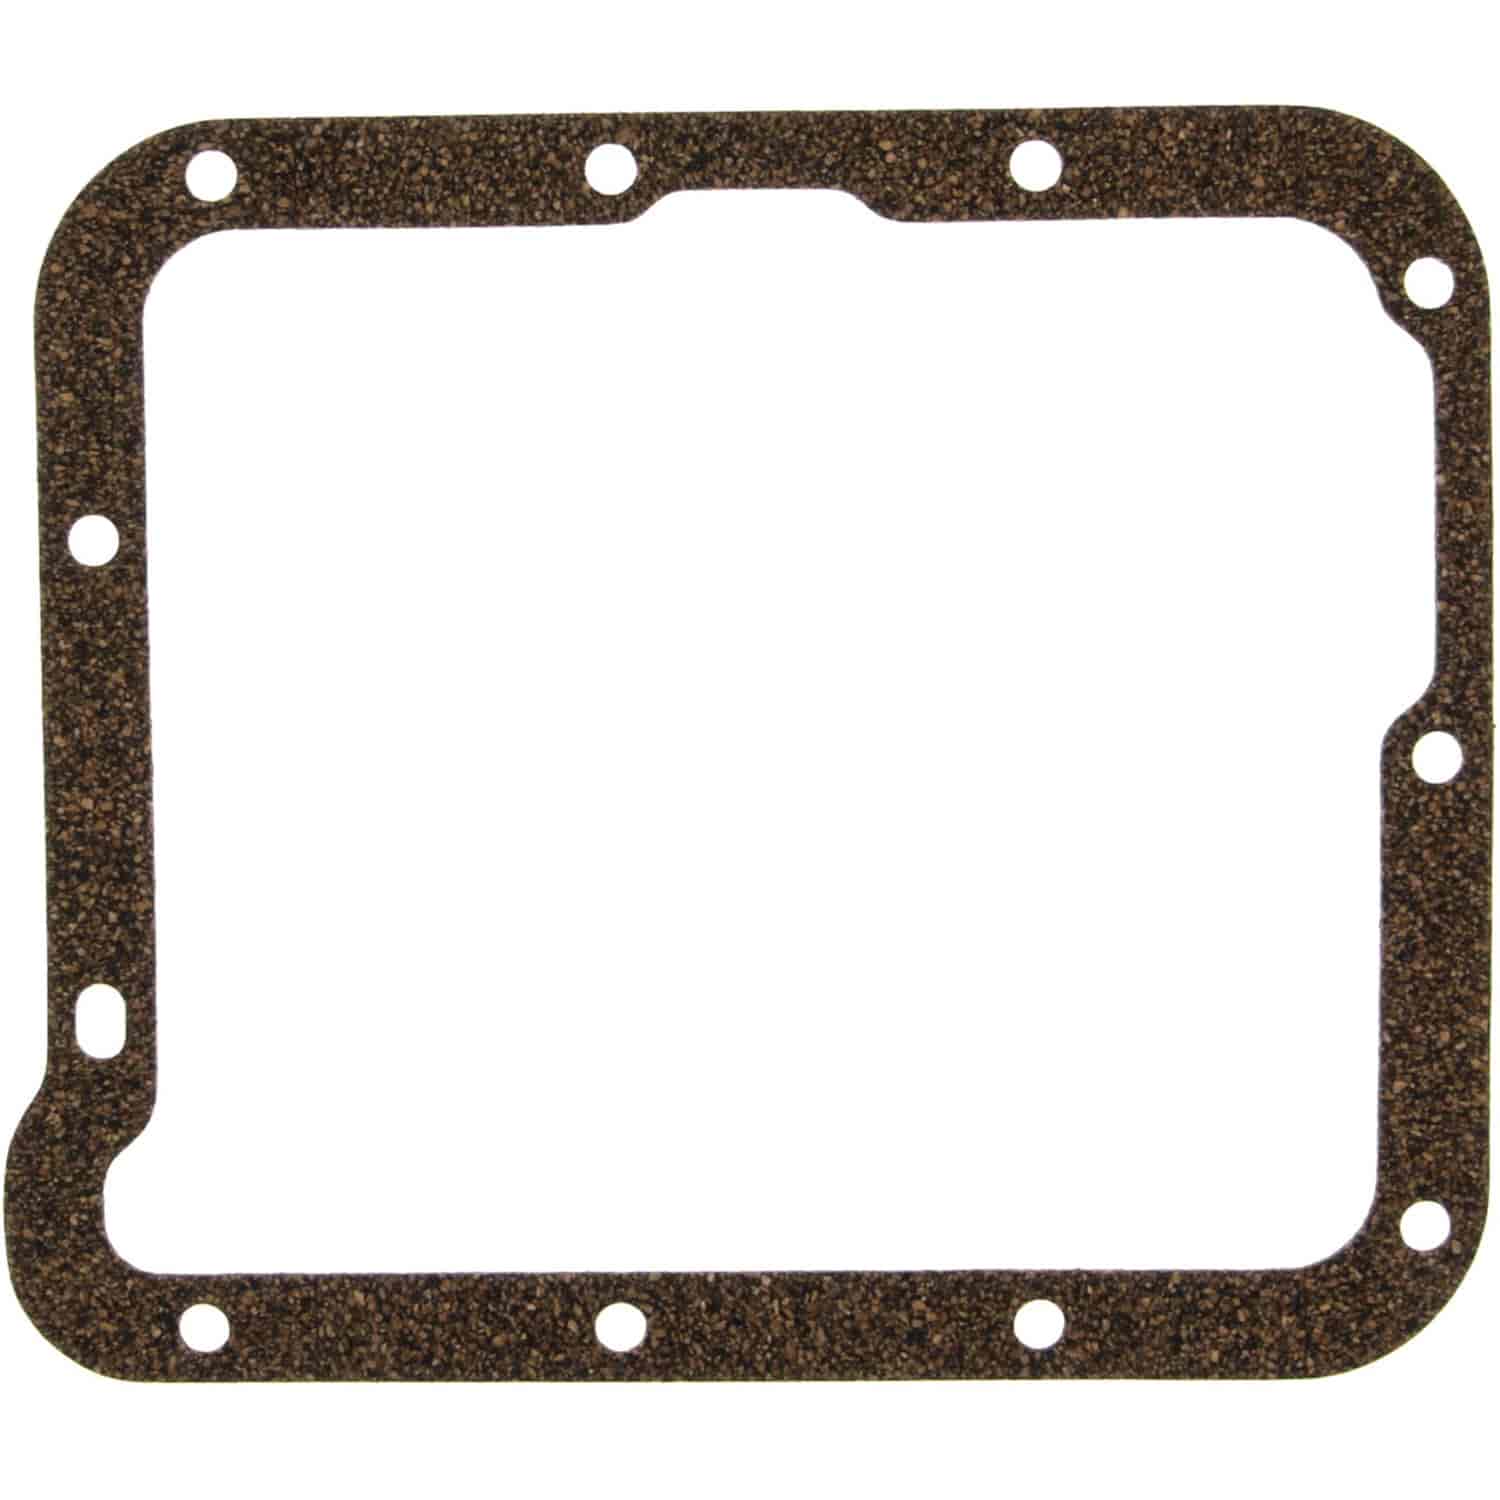 Automatic Transmission Gasket 1970-1986 Ford C4 in Cork-Rubber